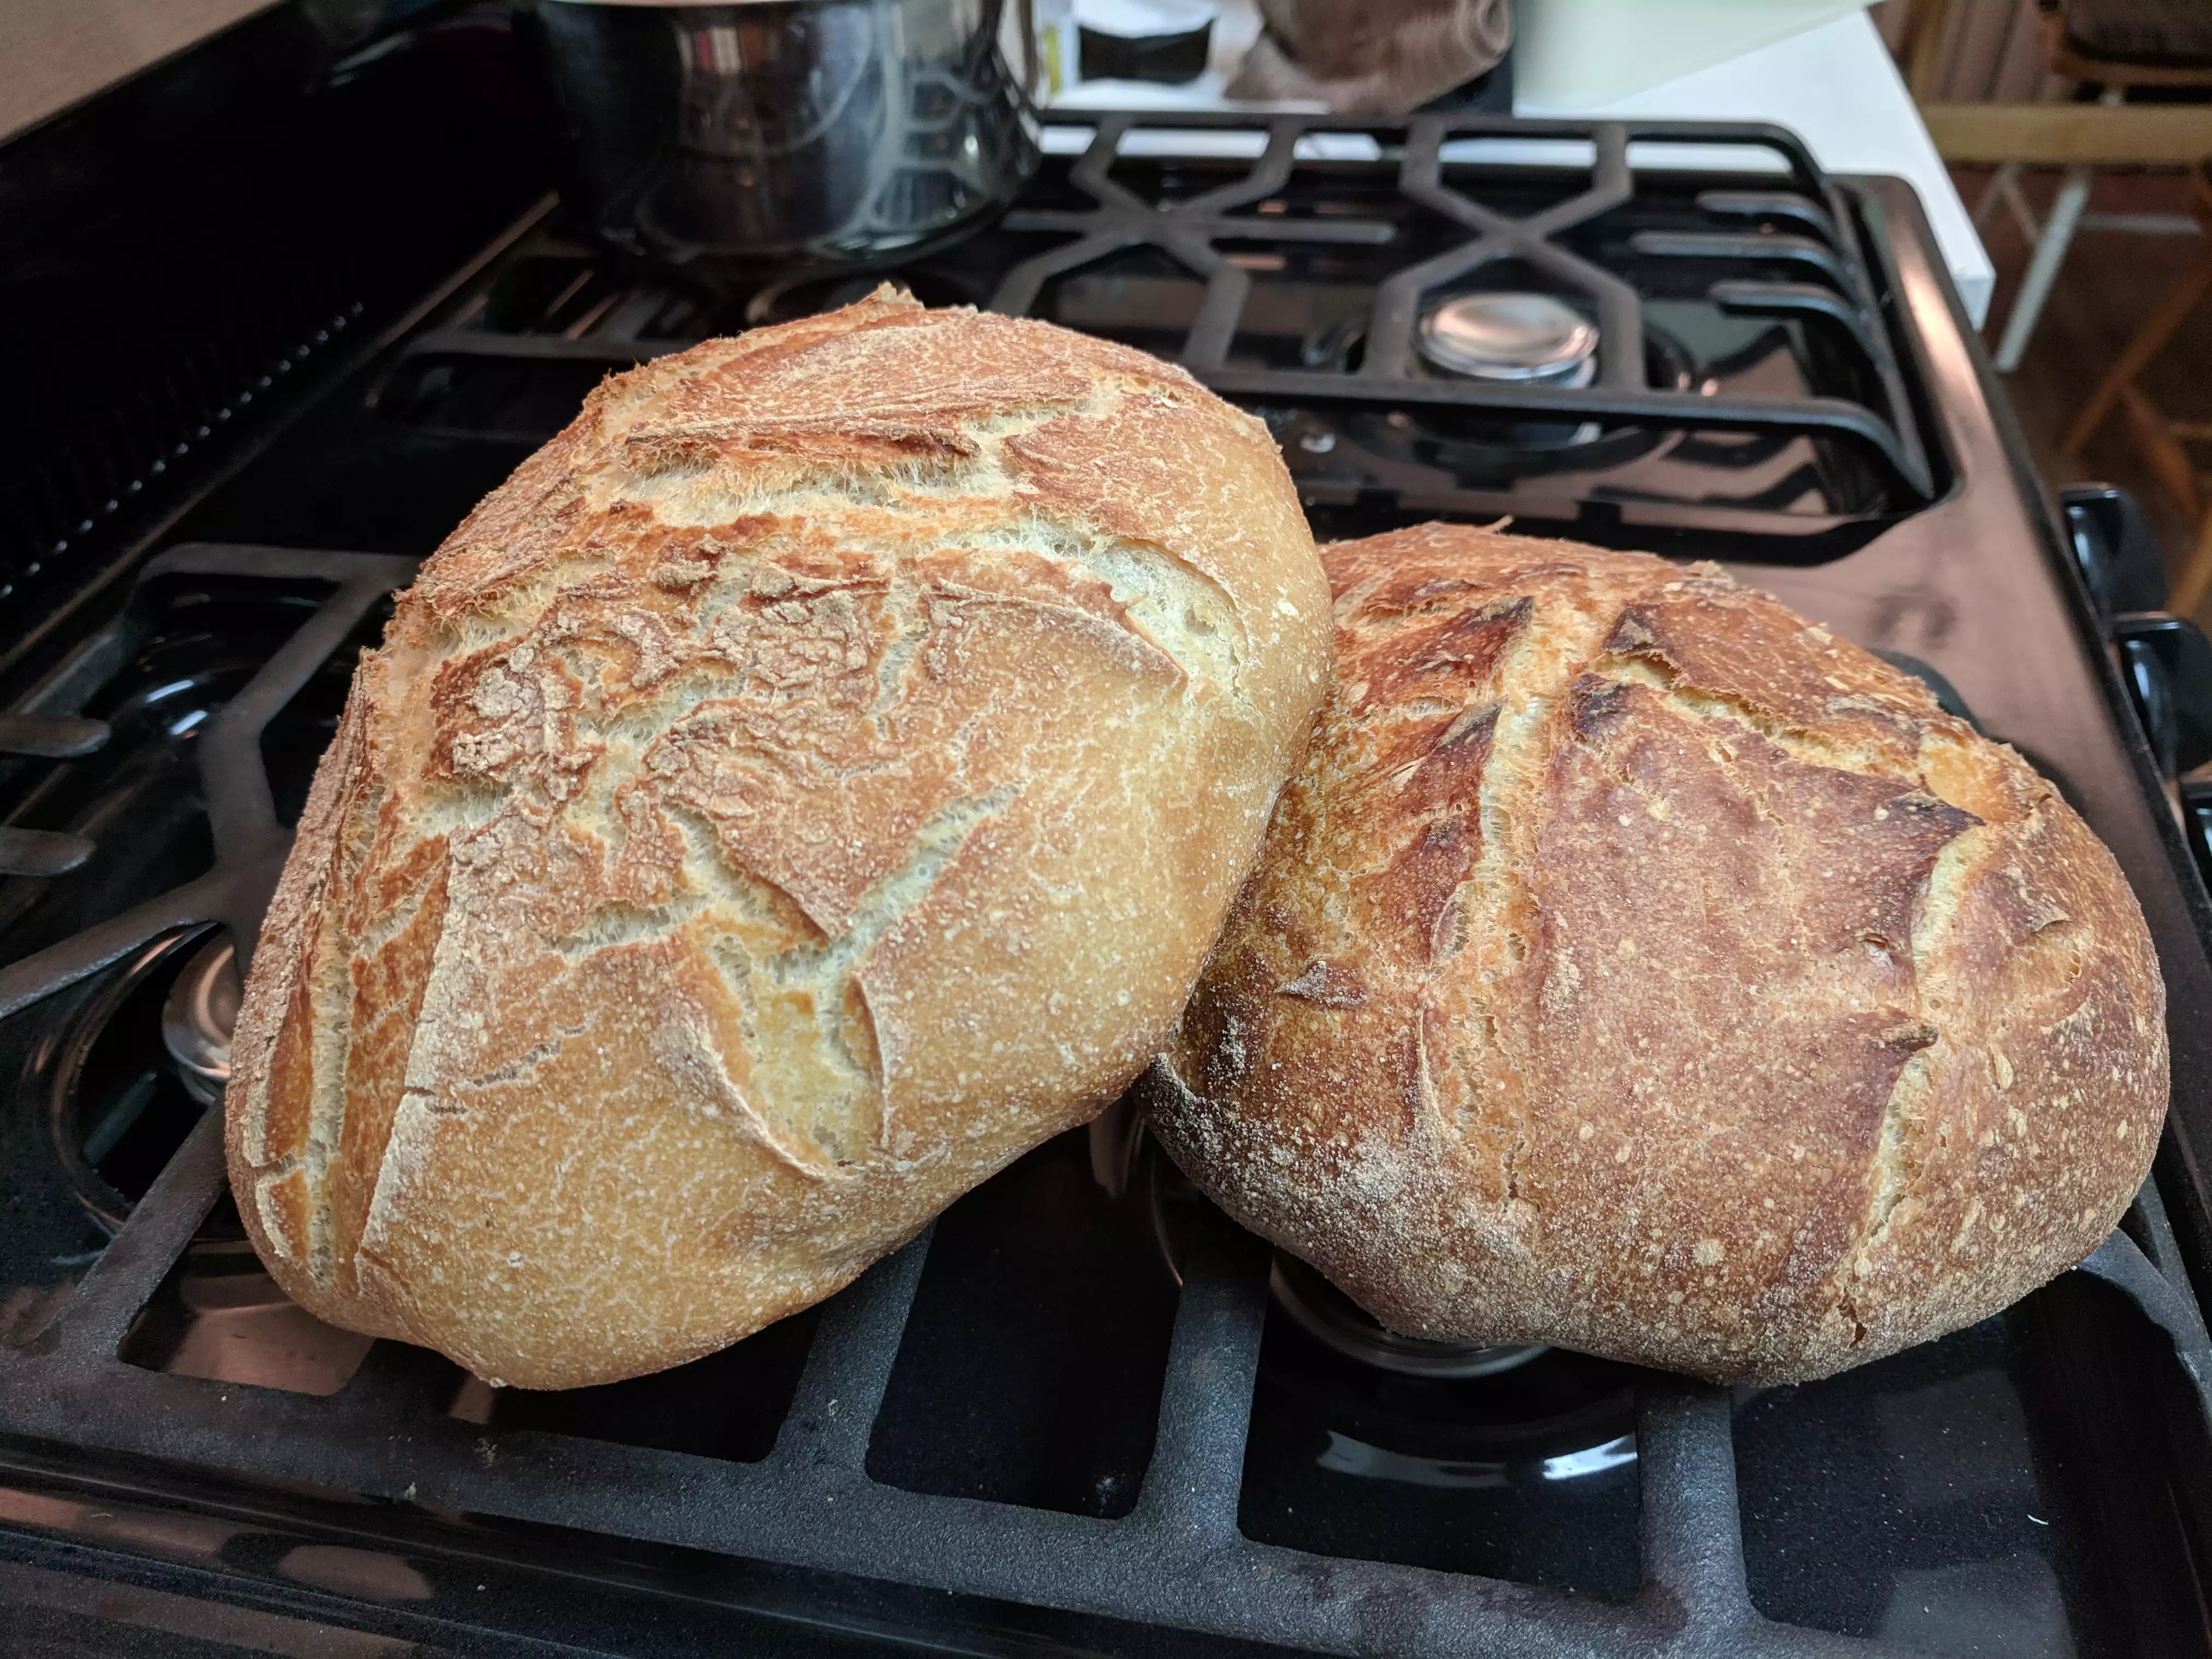 Two loaves of sourdough bread